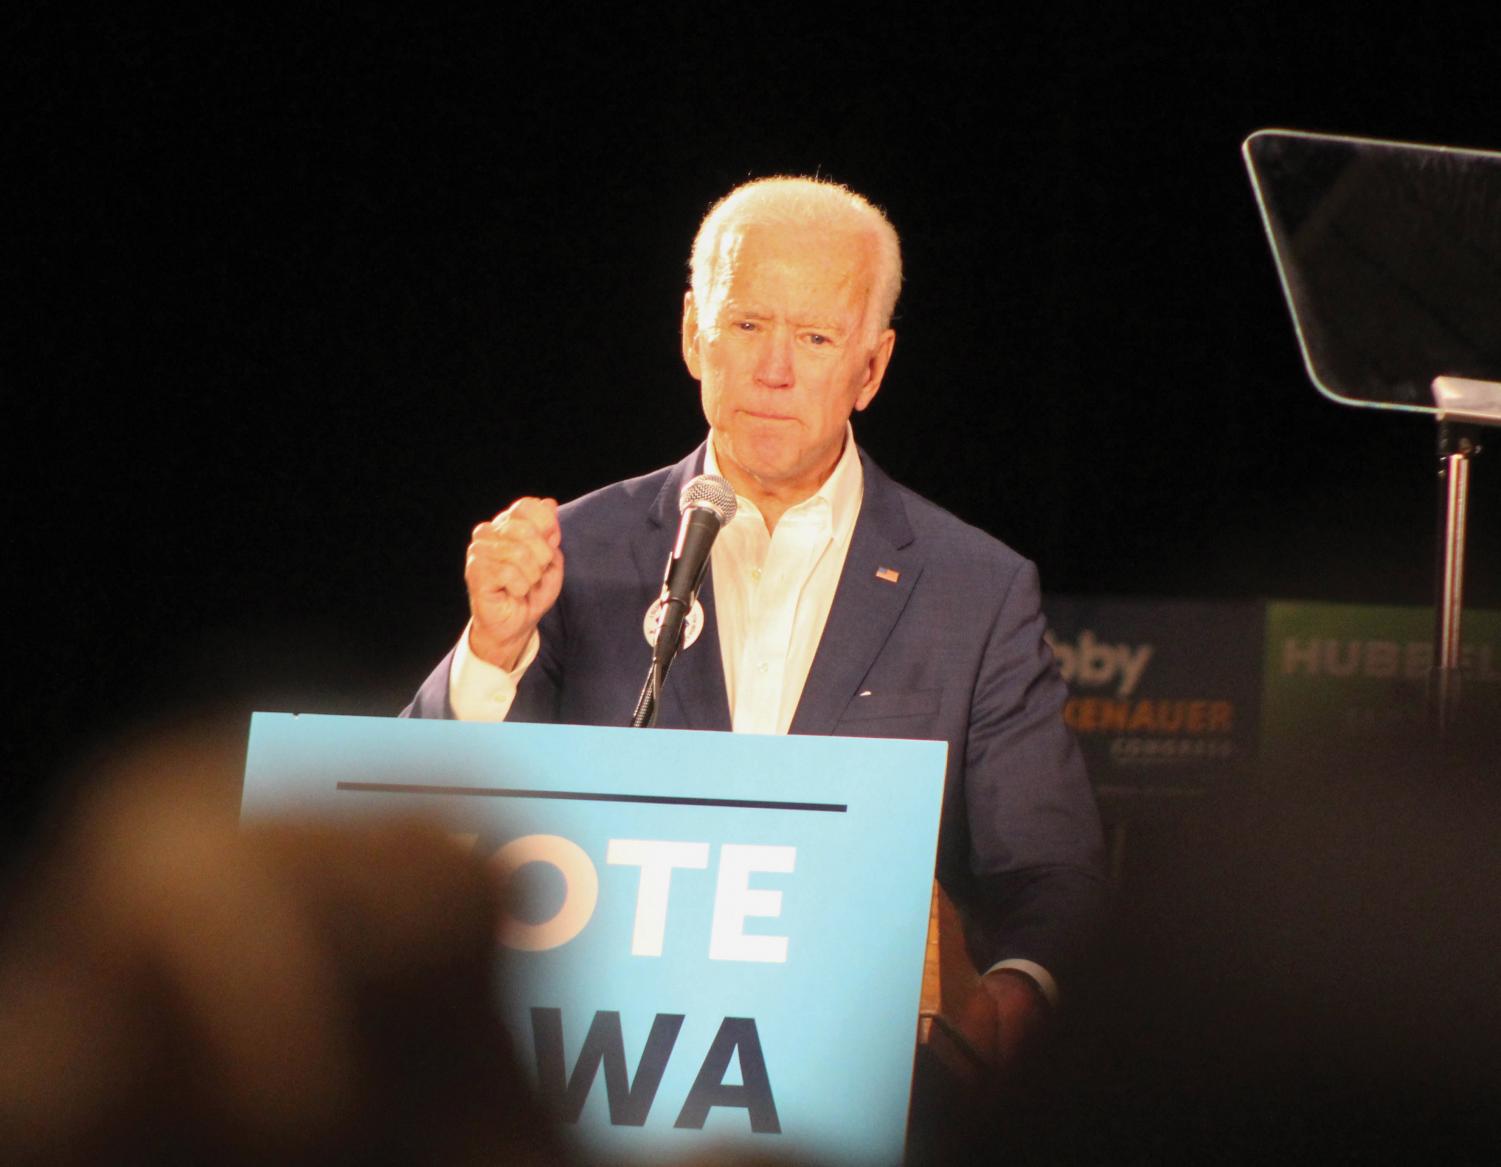 Former+VP+visits+Iowa+ahead+of+elections